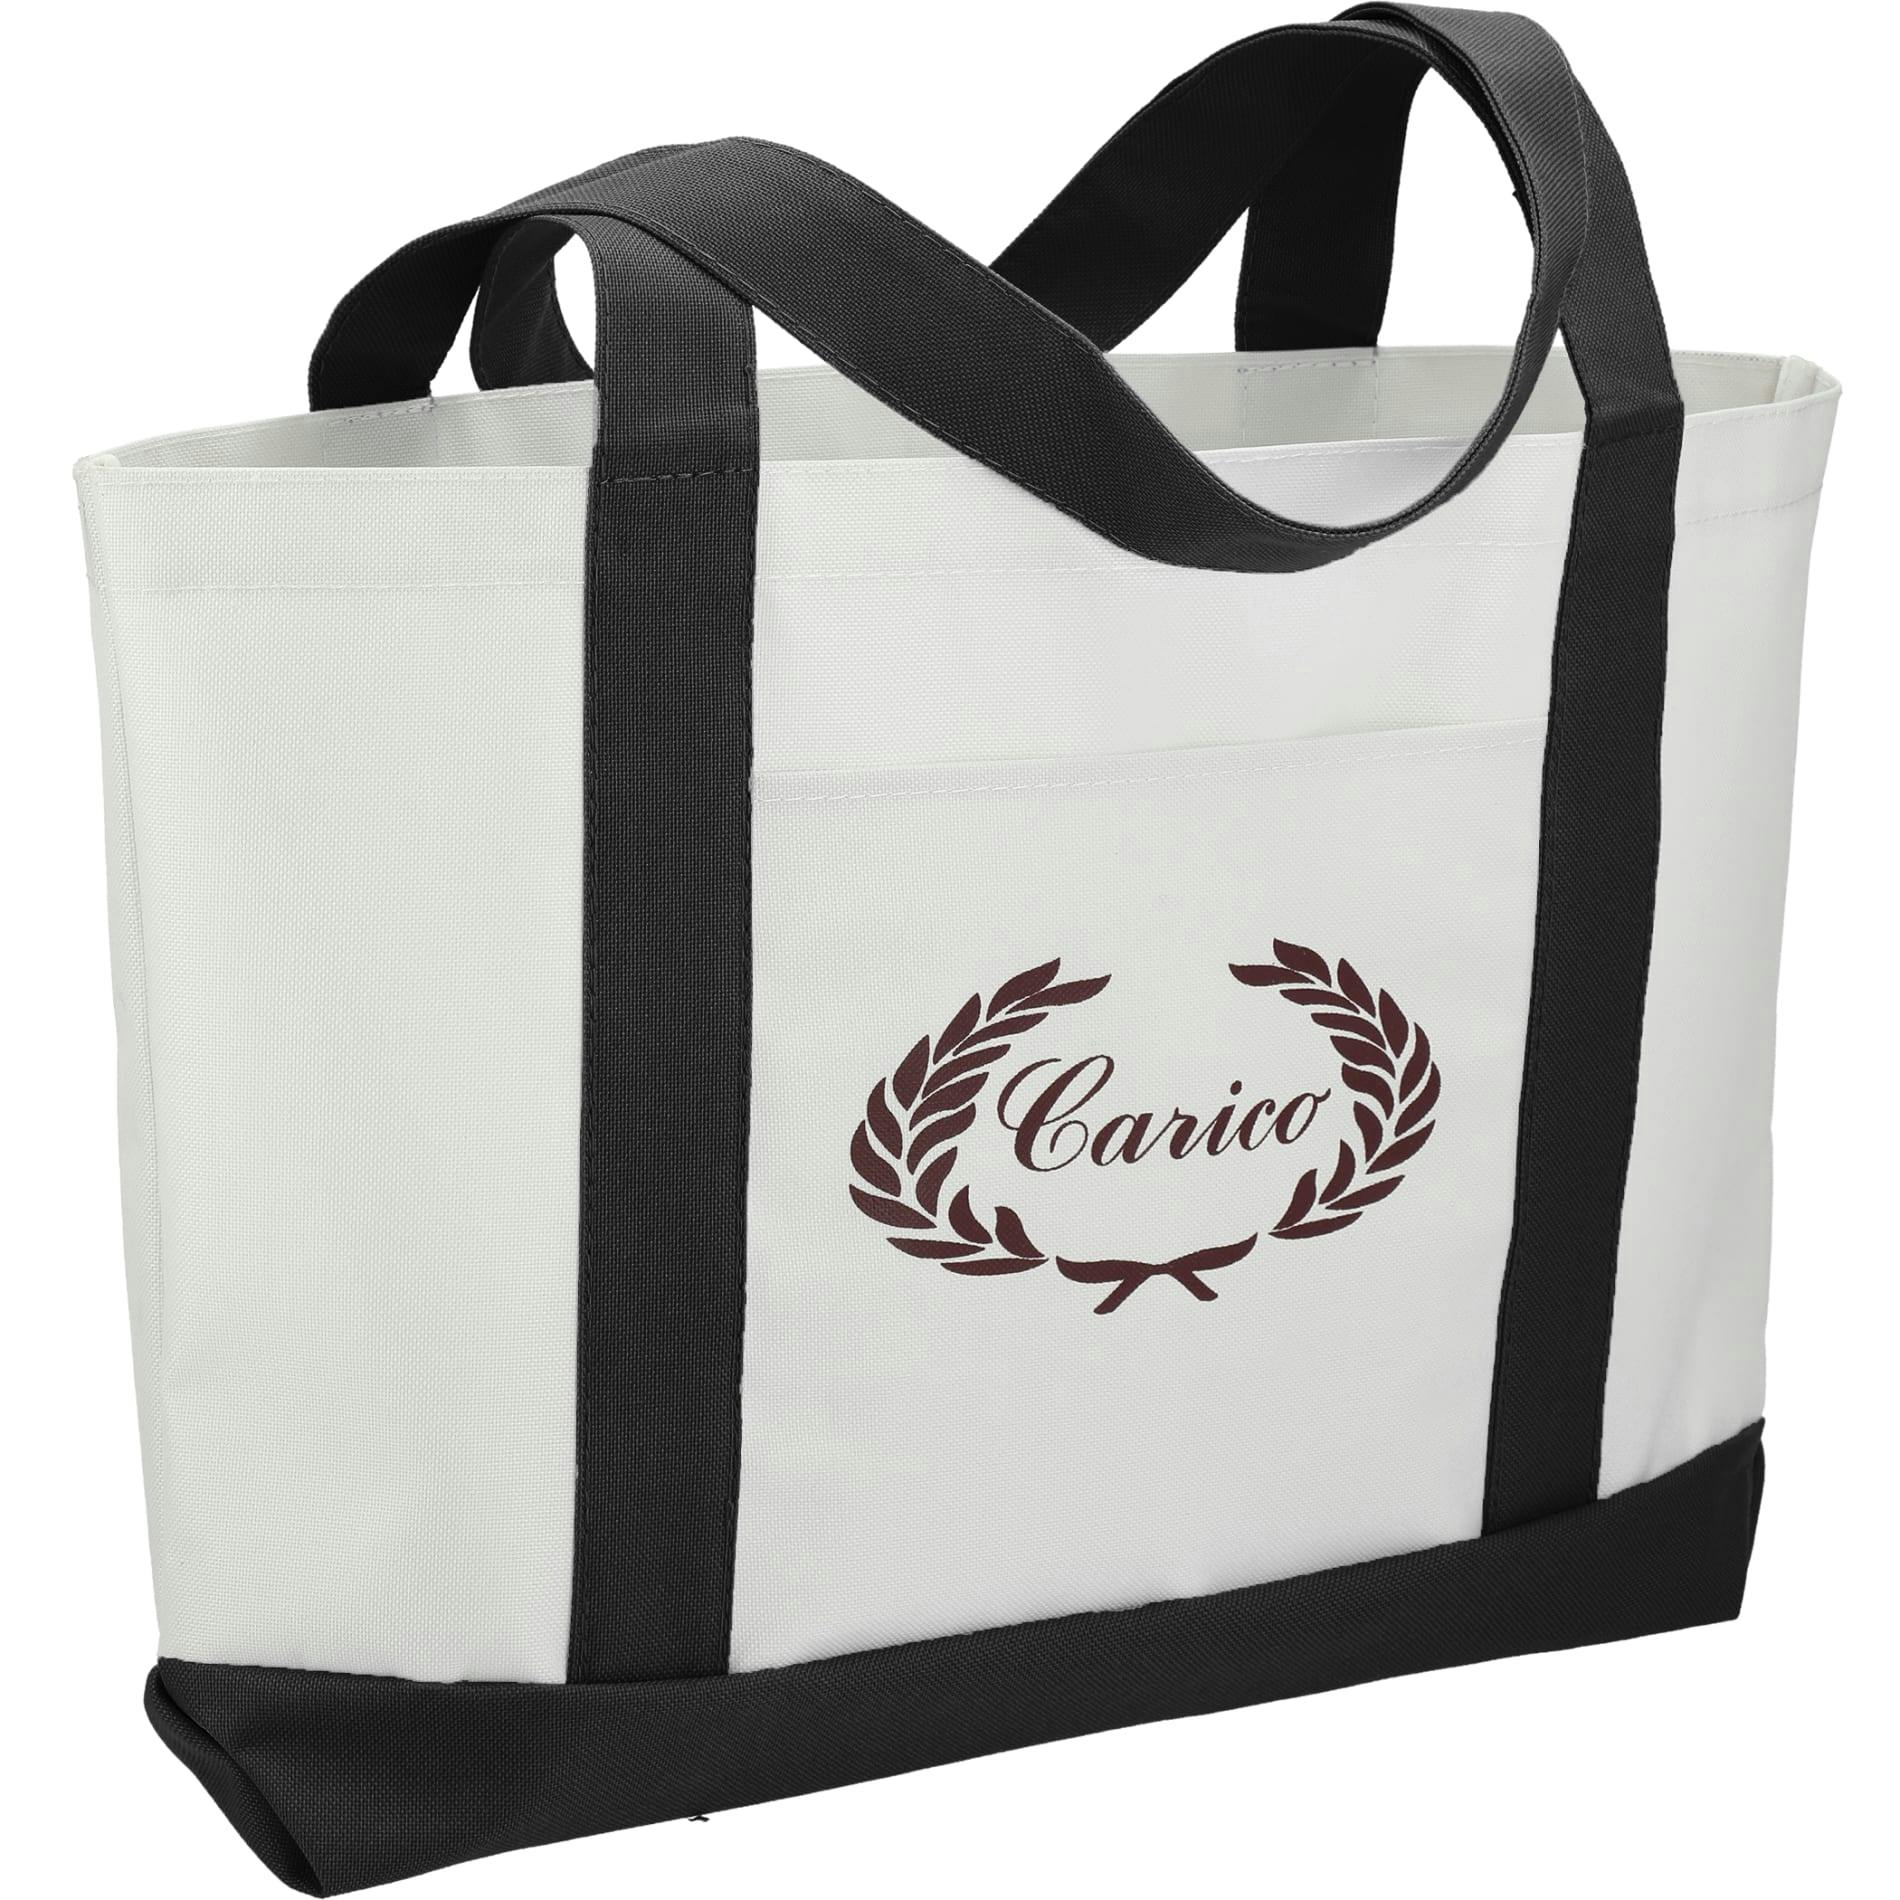 Large Boat Tote - additional Image 3